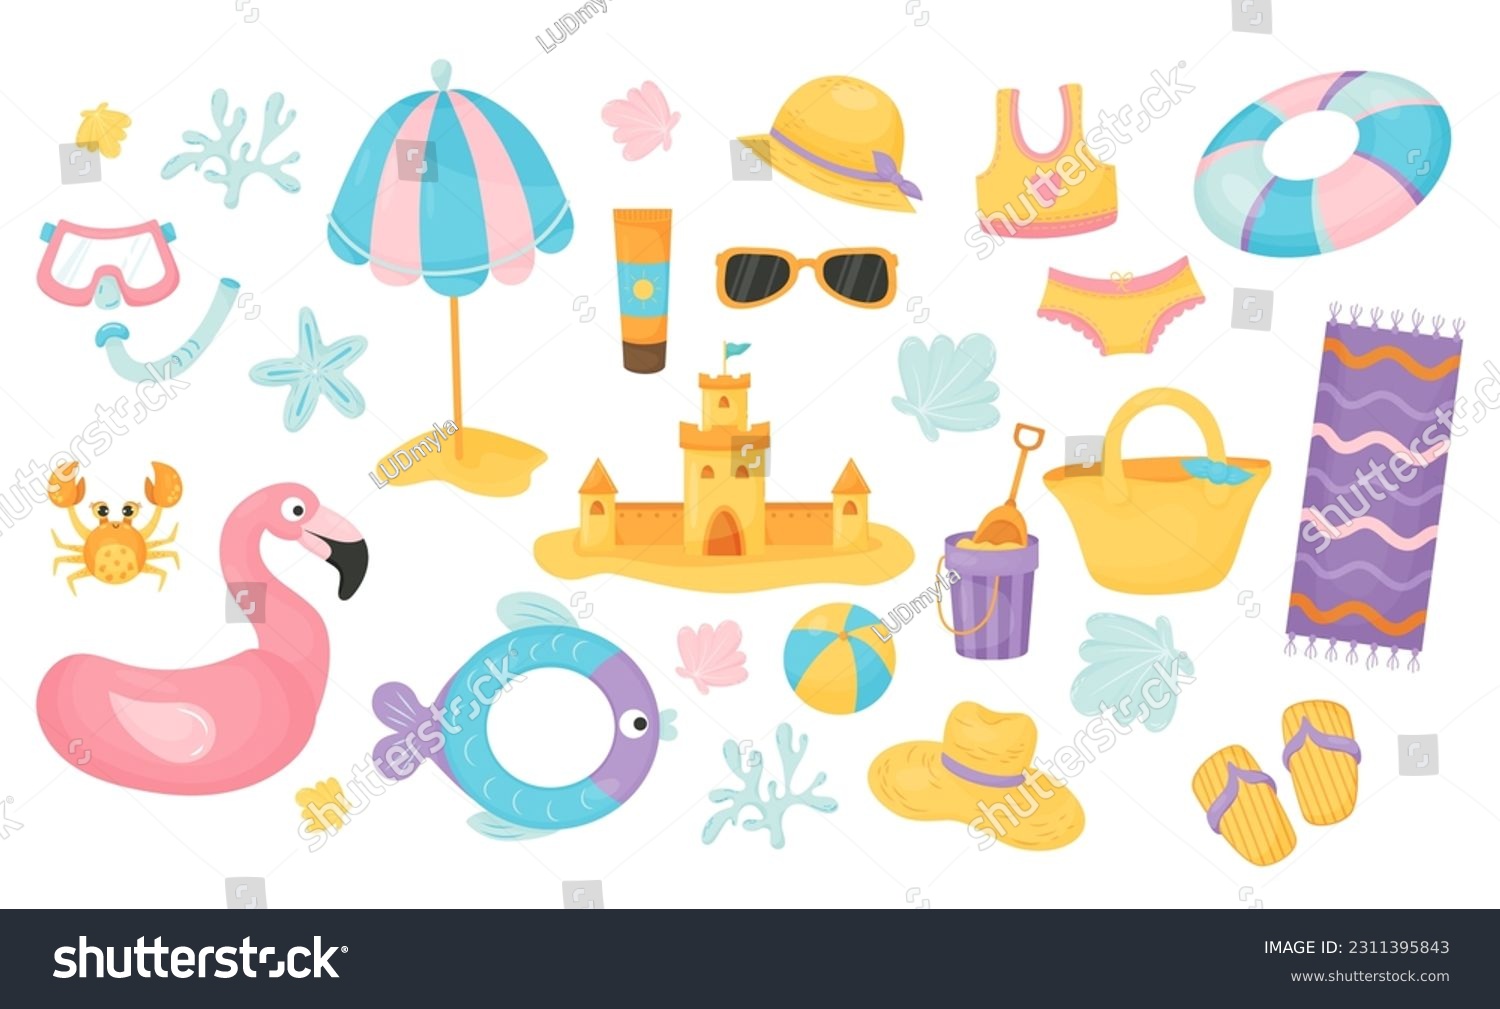 SVG of Summer collection. Sand castle, sun umbrella, life buoy, flamingos, ball, beach items and shells, mask with snorkel, crab and swimsuit. Vector illustration in cartoon style. Isolated cute elements svg